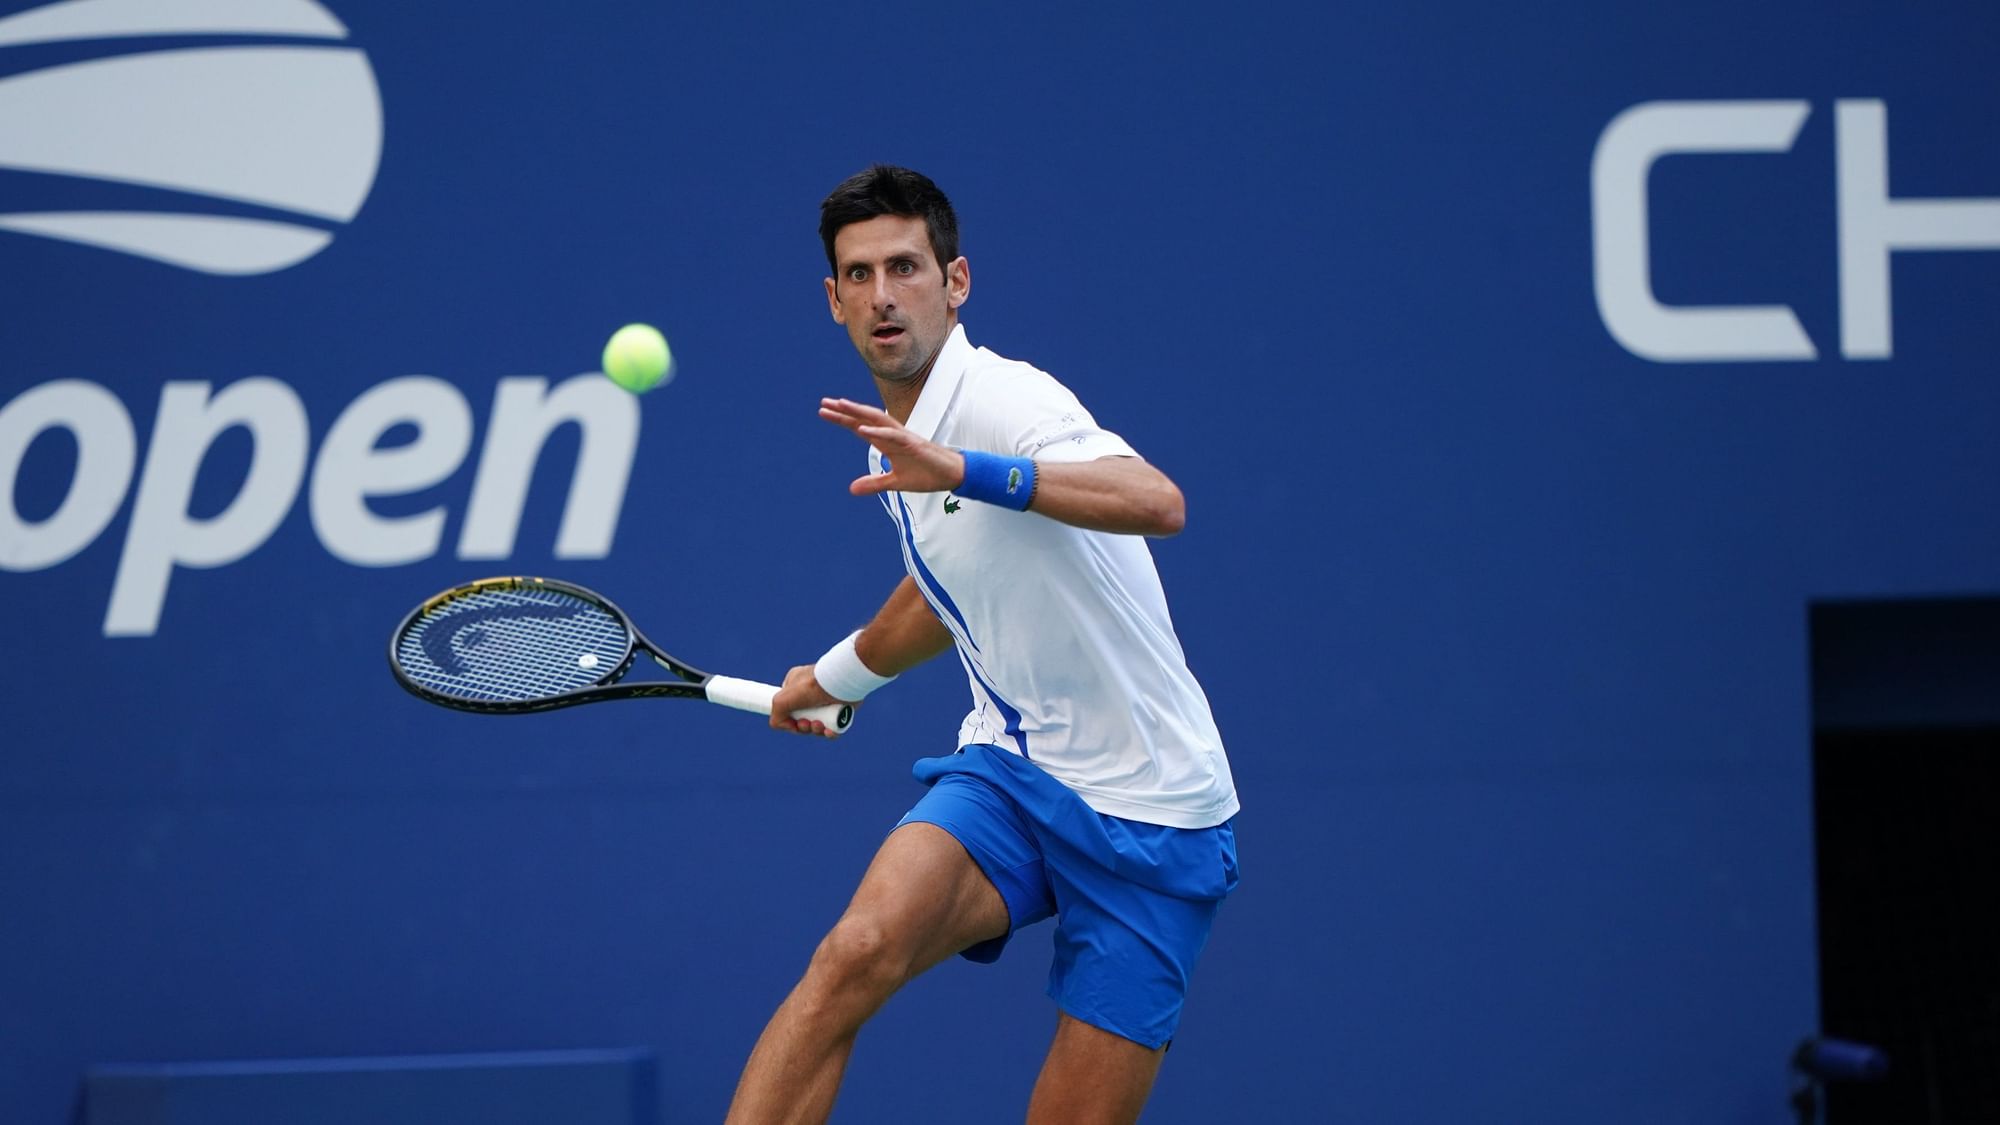 World No.1 Novak Djokovic was disqualified in the US Open fourth round match after accidentally hitting a line umpire with a ball.